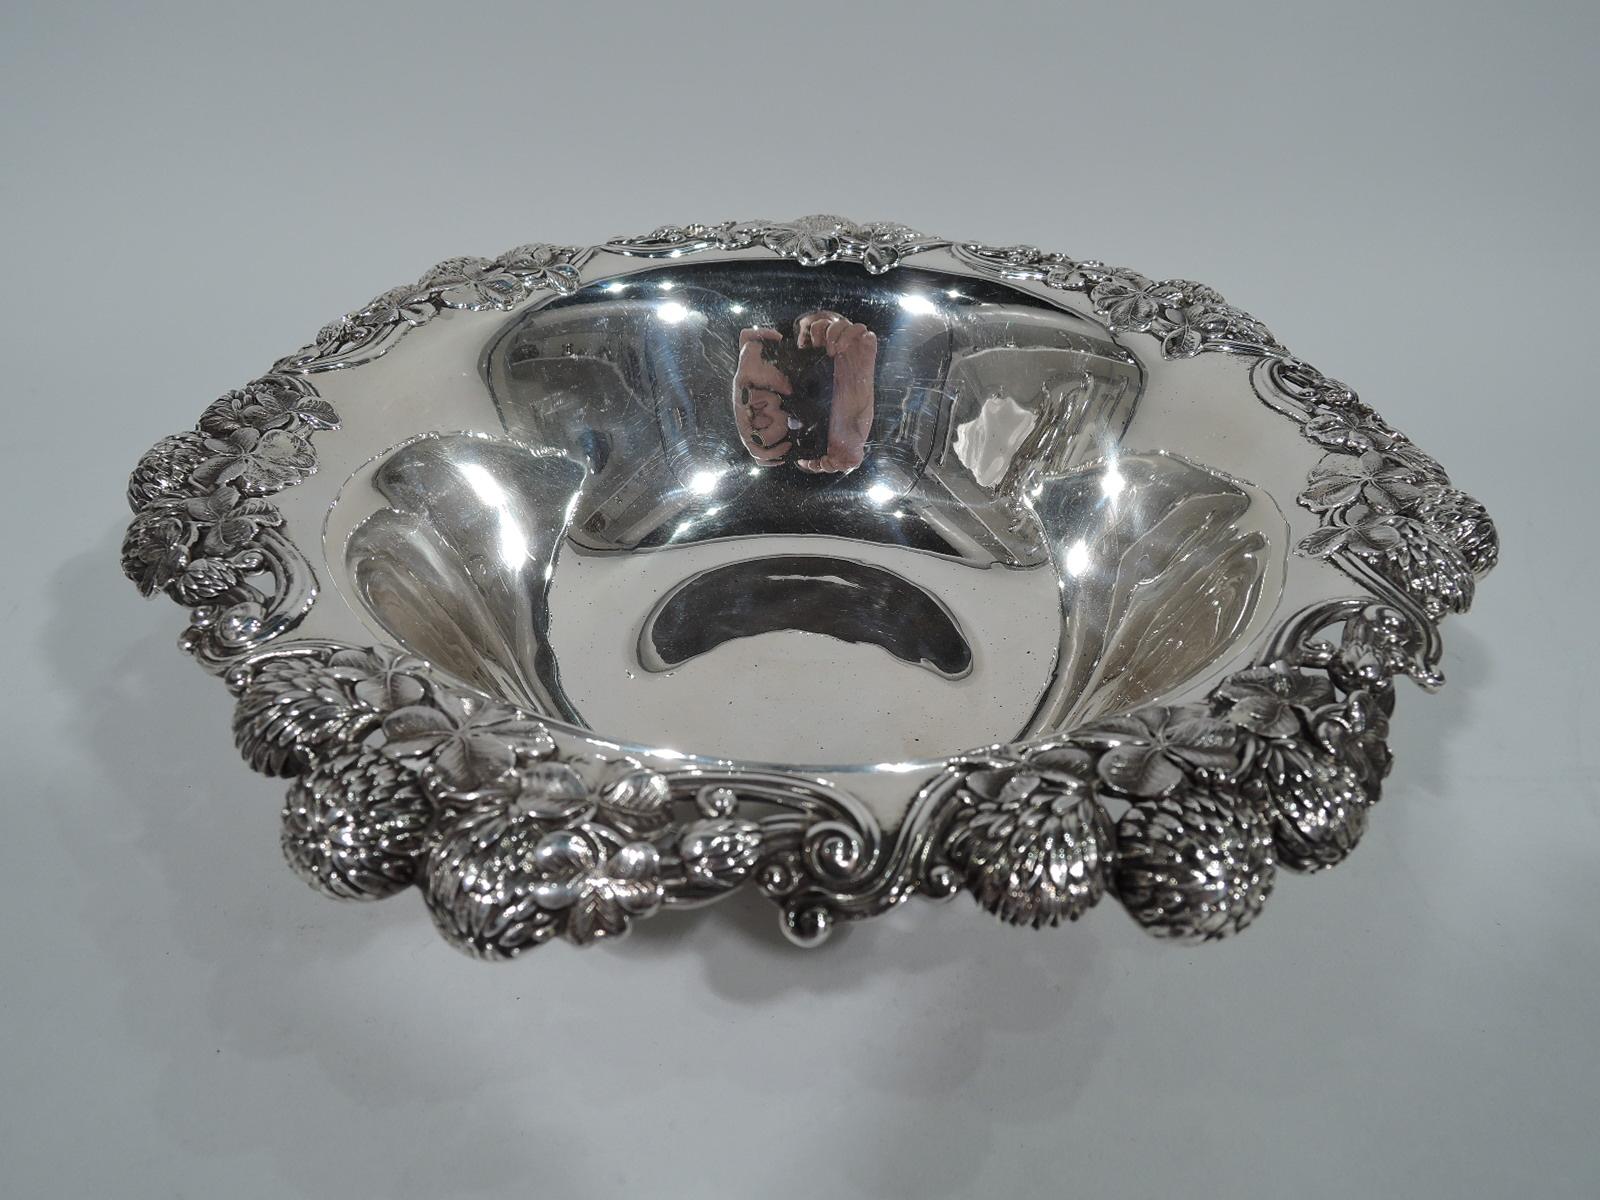 Clover sterling silver bowl. Made by Tiffany & Co. in New York. Tapering sides and turned-down rim with bunched blossoms. An early piece in this Gilded Age high-low pattern that combines wild flowers and precious metal. Fully marked including